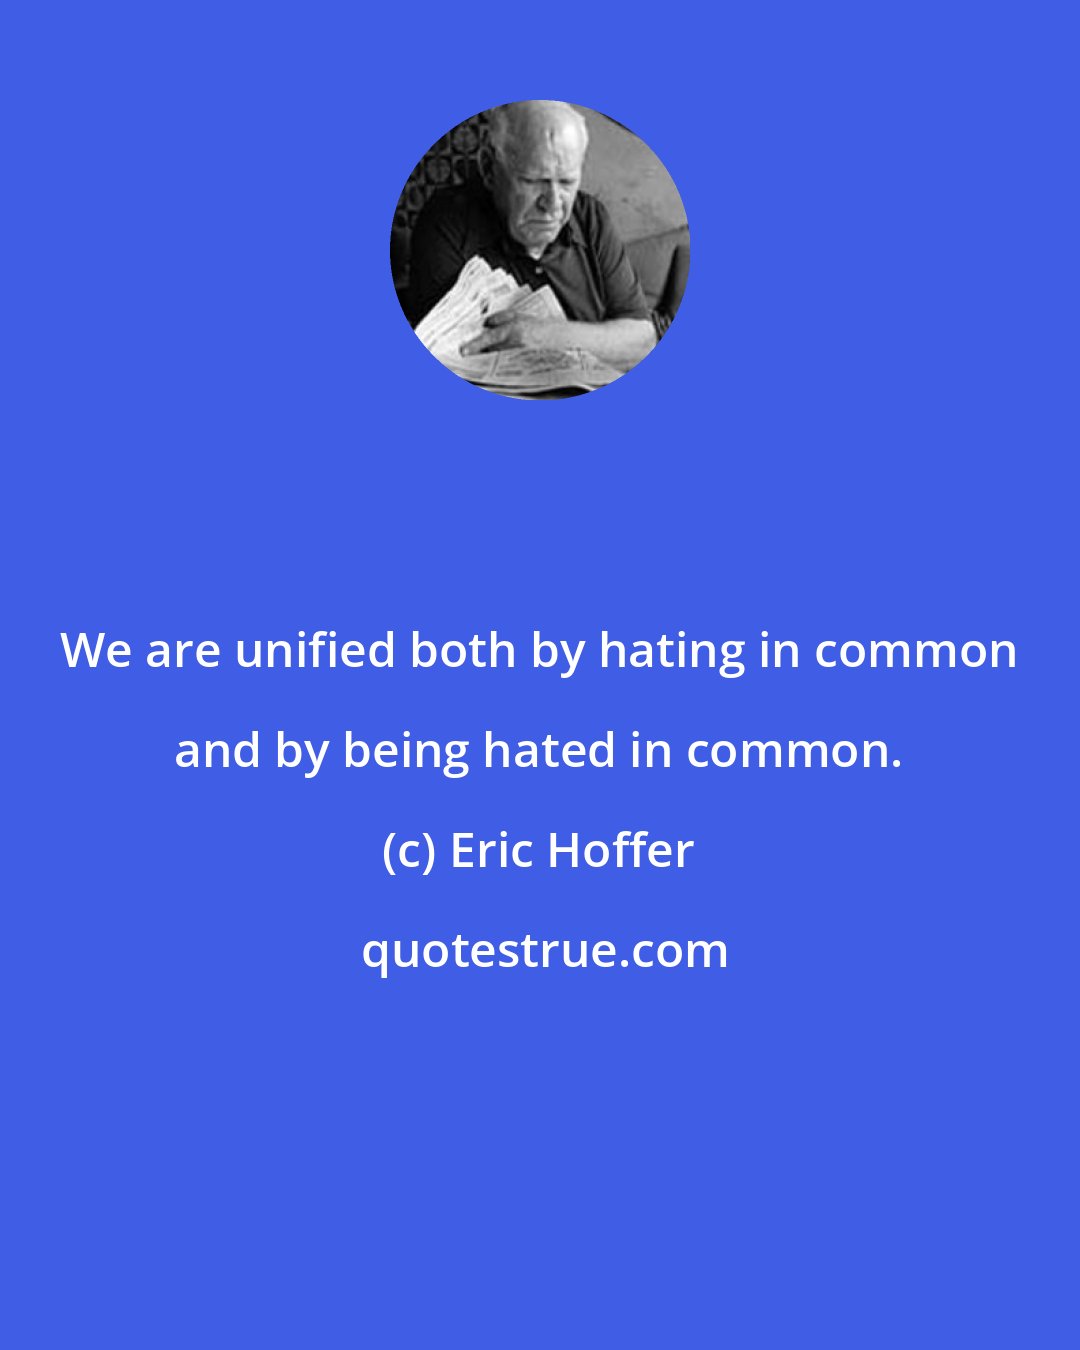 Eric Hoffer: We are unified both by hating in common and by being hated in common.